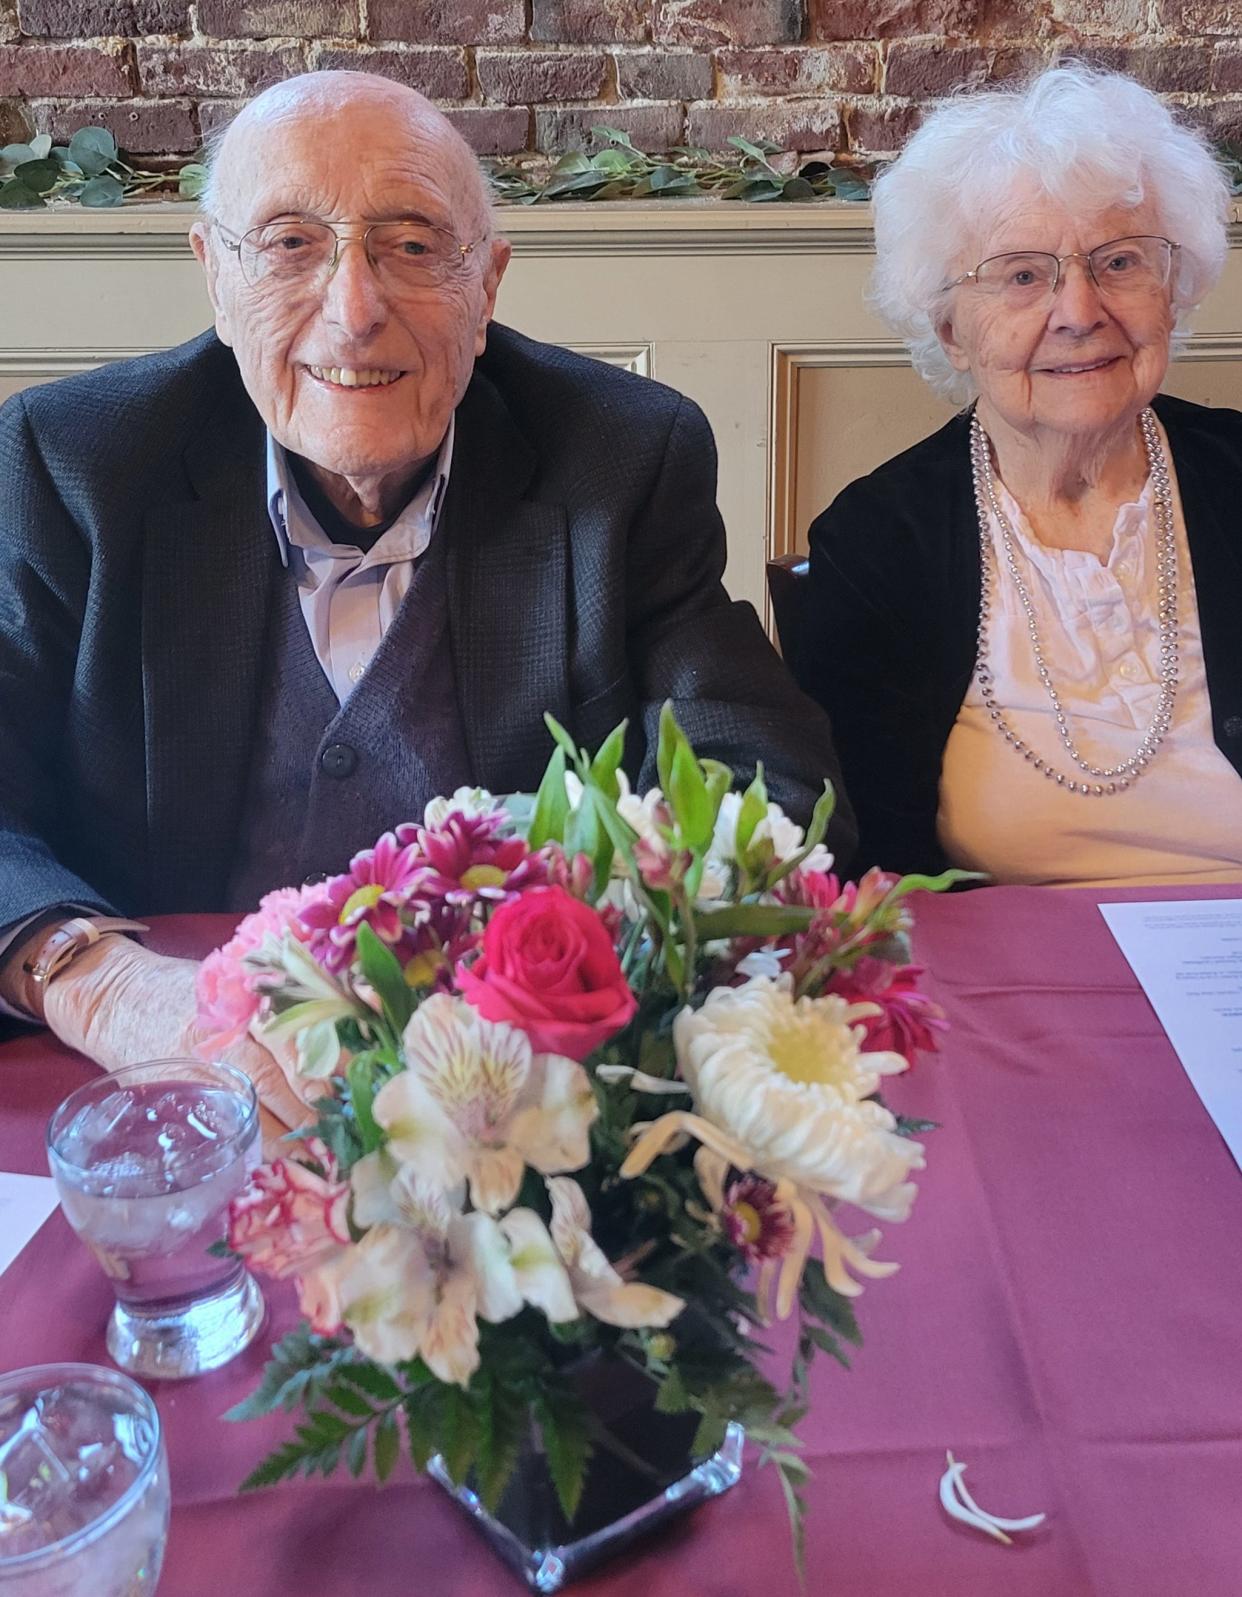 Richard and Sue Bicknell of Dover have been married for 75 years. They celebrated their anniversary at Blue Latitudes restaurant in Dover.